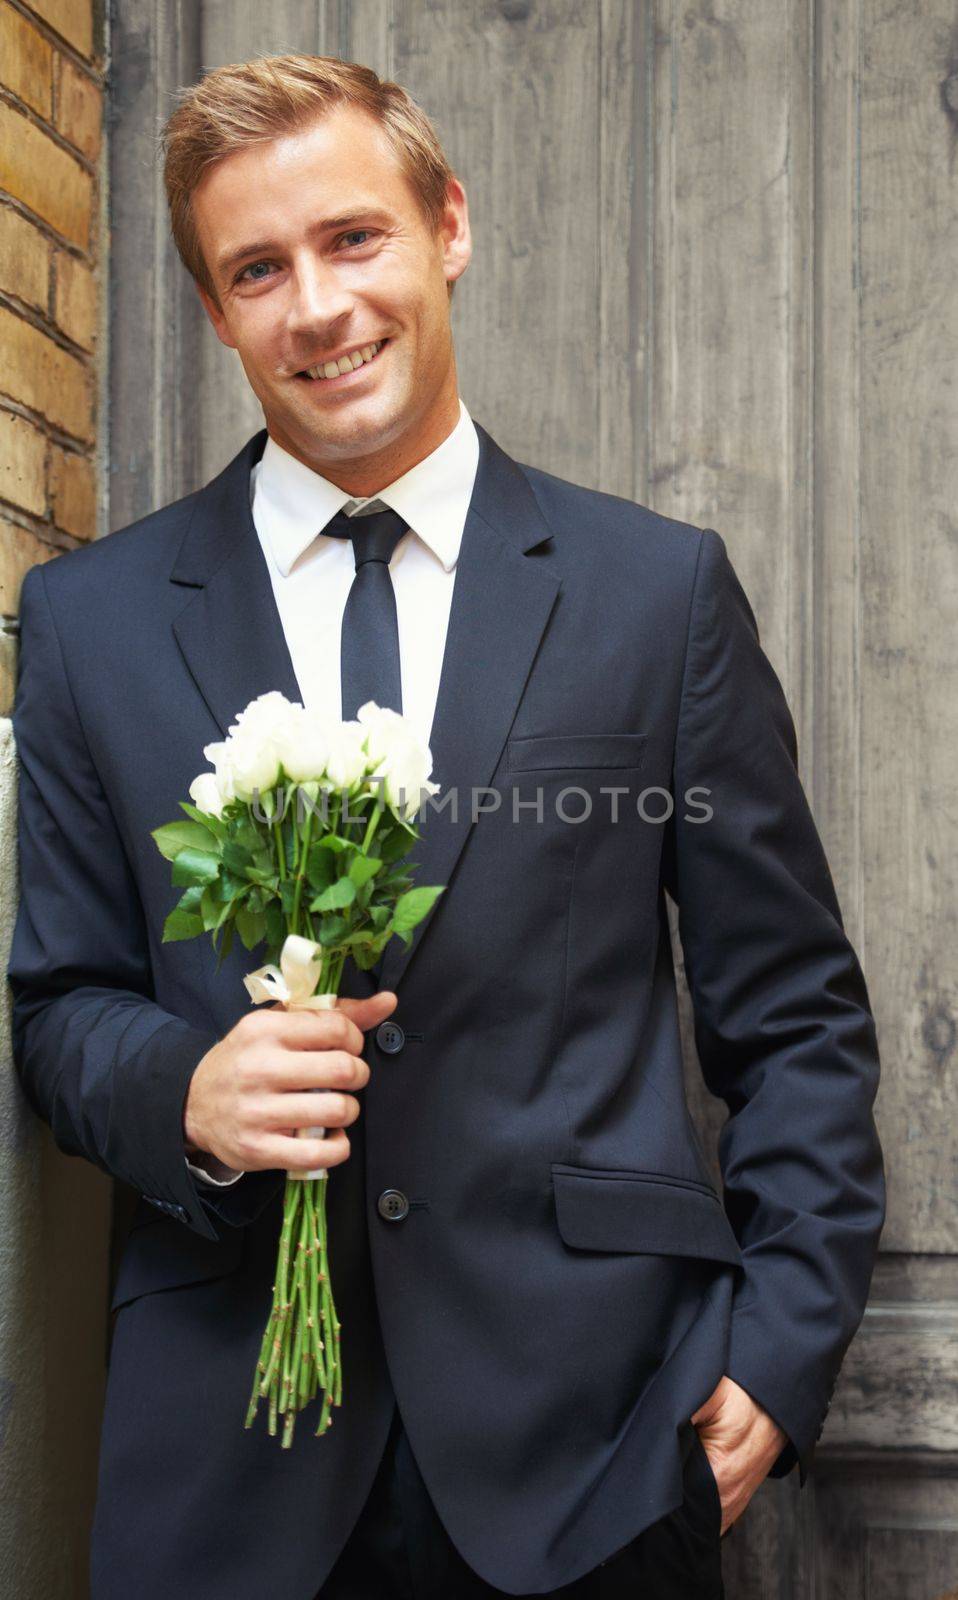 Rose, portrait and man with gift for valentines day, anniversary or first date while waiting on door background. Face, flowers and gentleman with sweet, gesture or offering for love and romance.